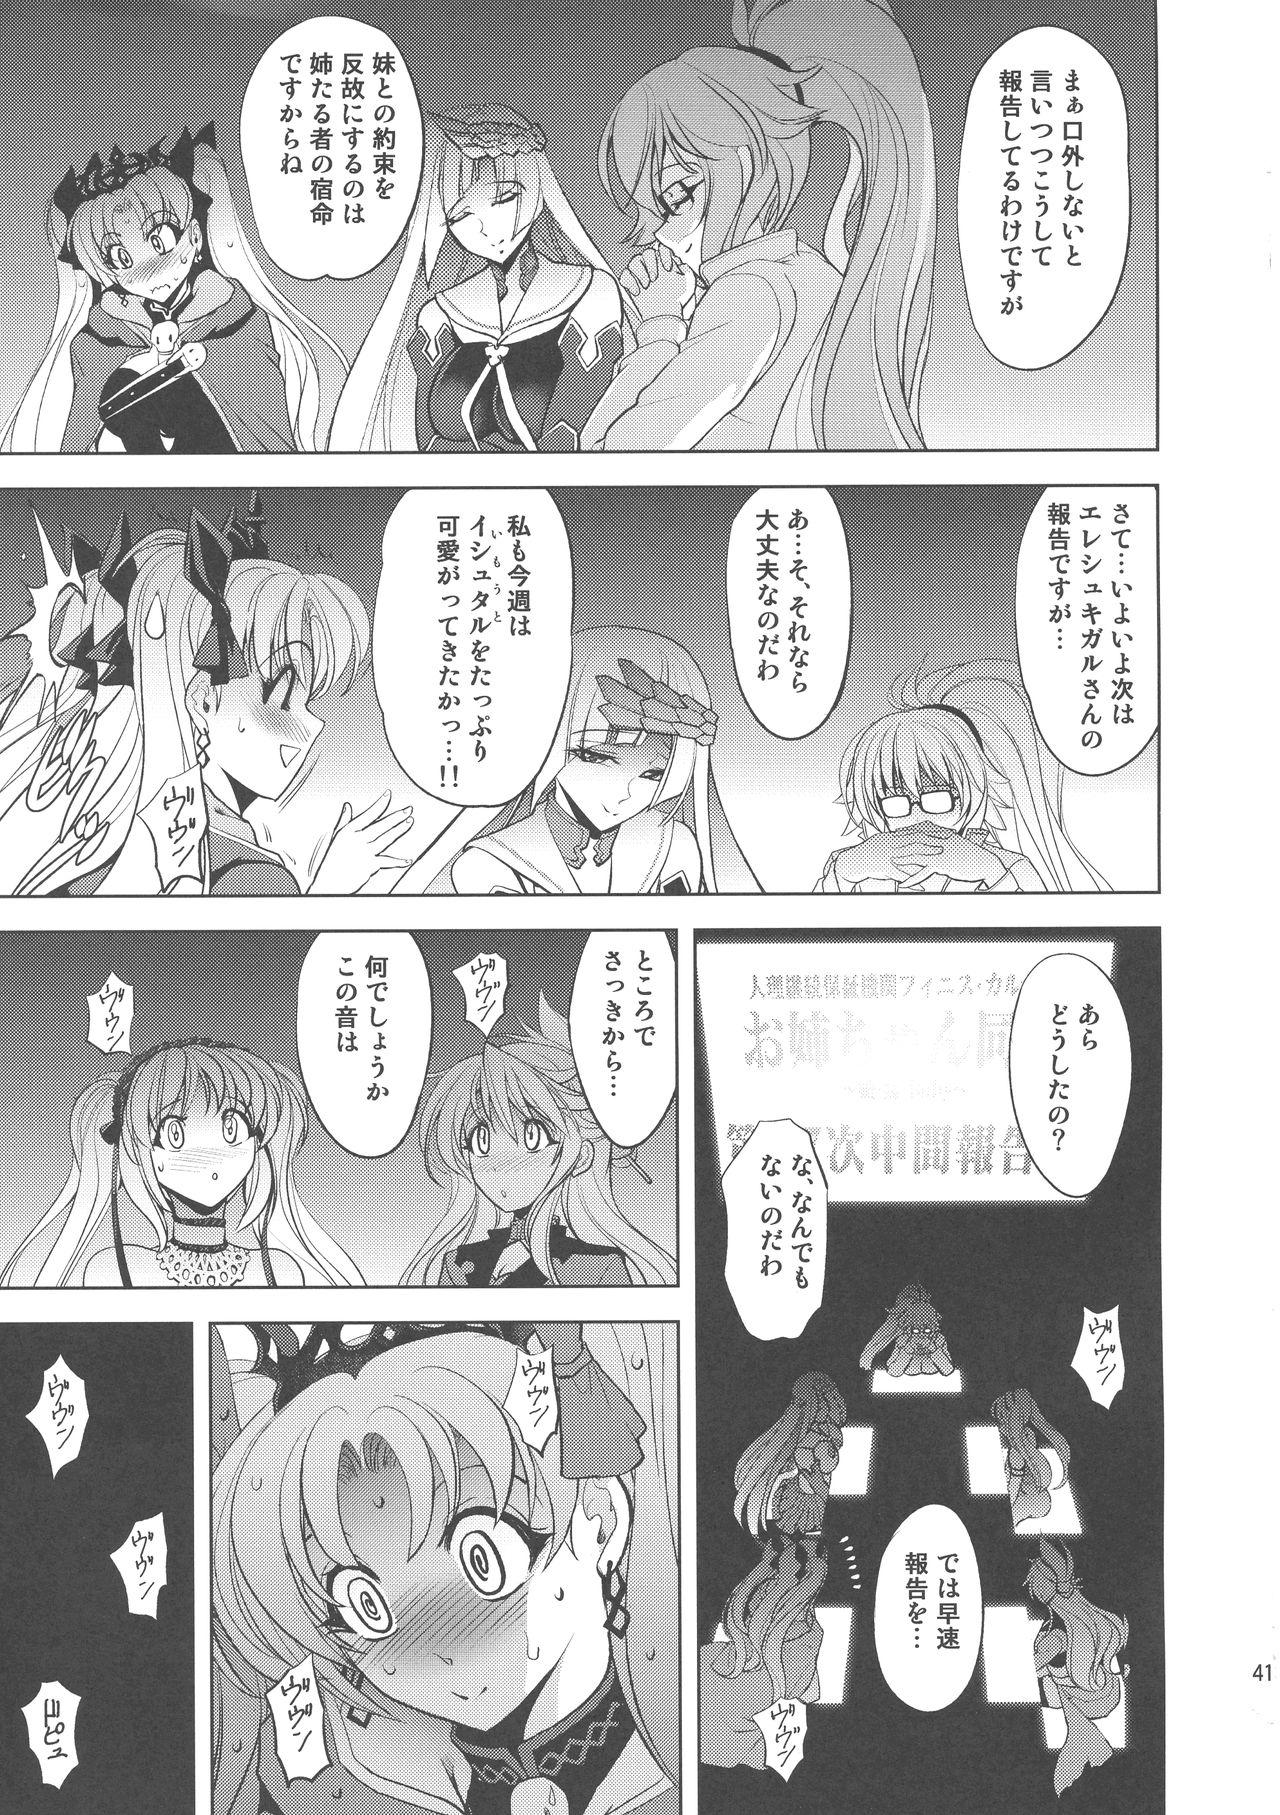 Tgirl Onee-chan Assemble!! - Fate grand order Tinder - Page 41